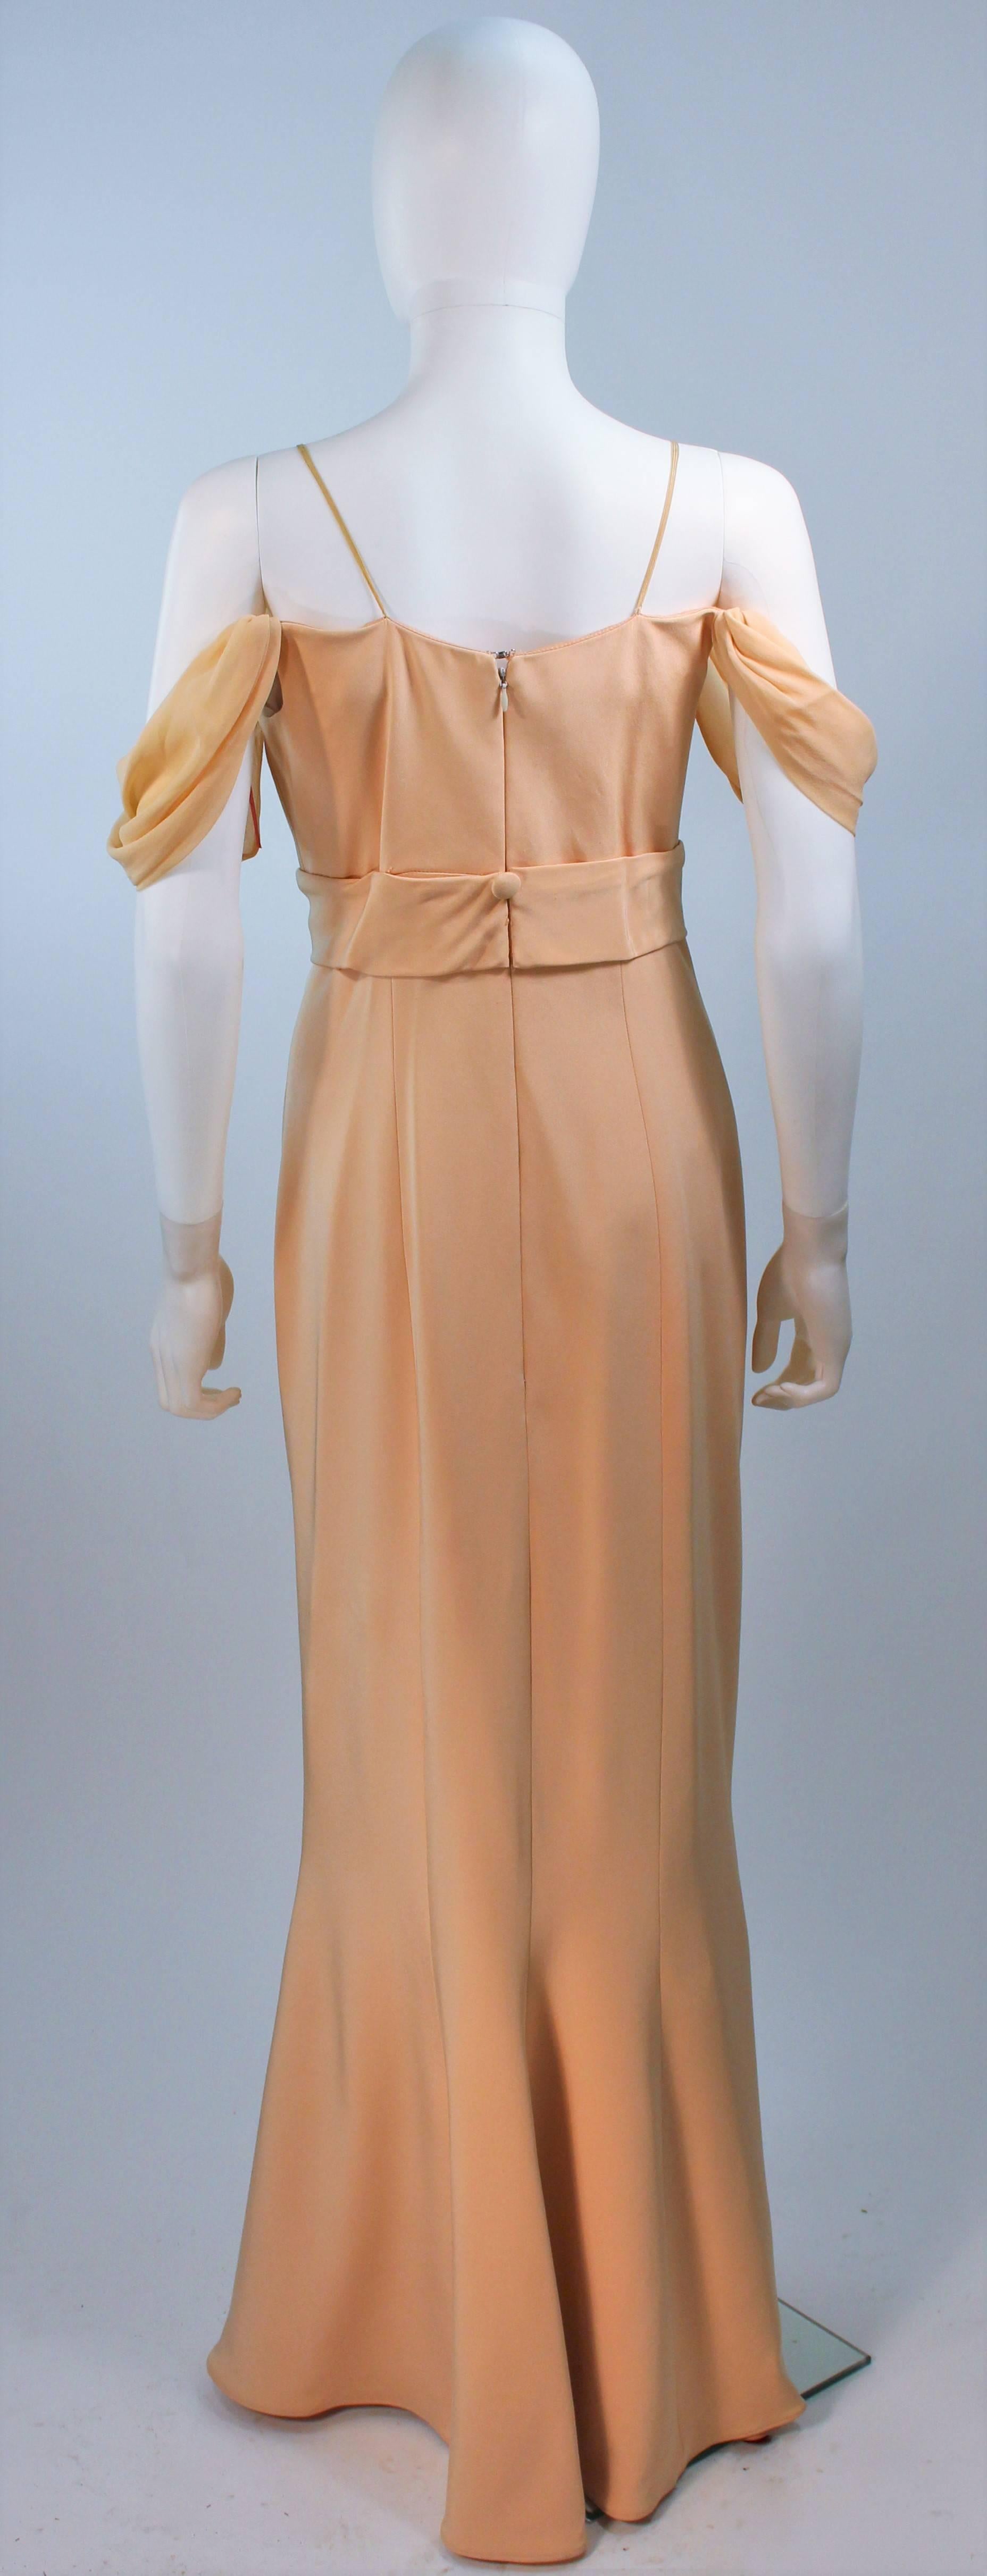 Brown SAM CARLIN Nude Draped Off-Shoulder Gown with Rhinestone Decollete Size 10 For Sale